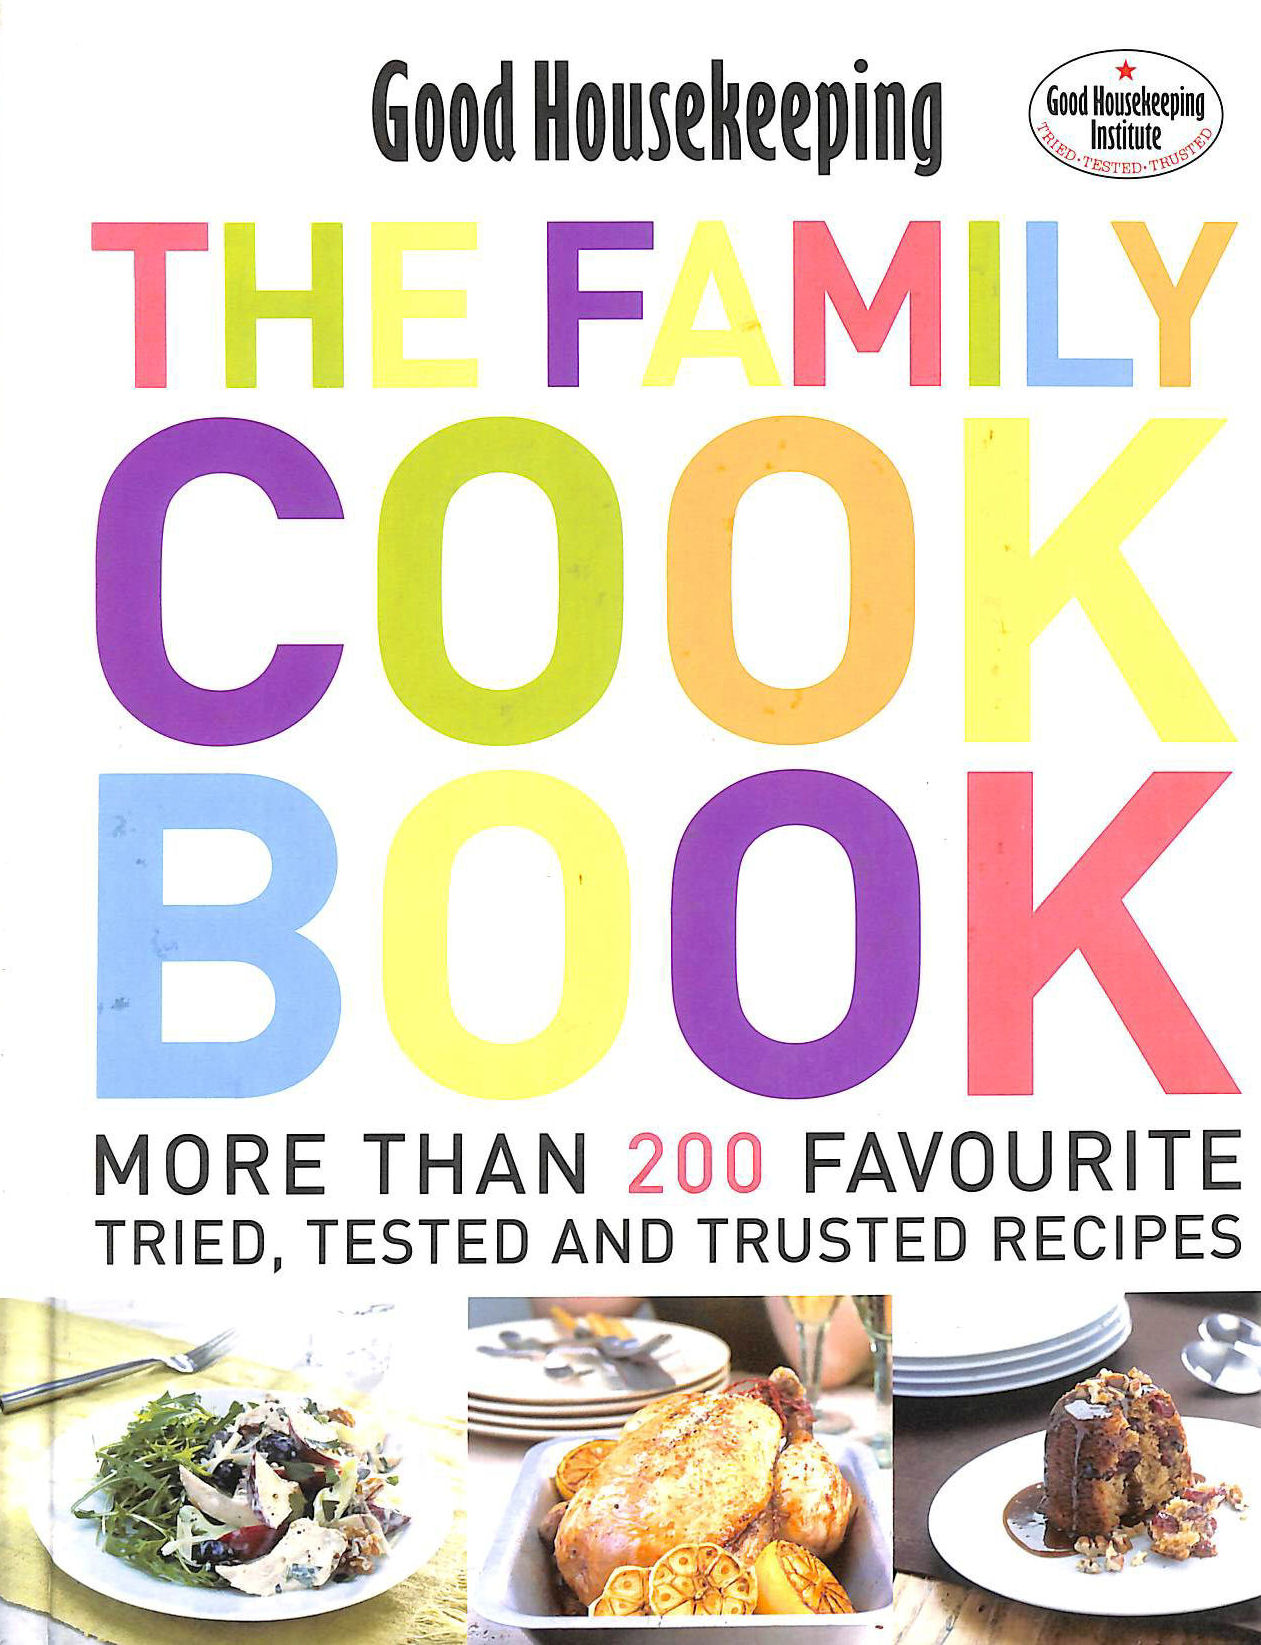 GOOD HOUSEKEEPING INSTITUTE - GOOD HOUSEKEEPING THE FAMILY COOK BOOK: More Than 200 Favourite Tried, Tested And Trusted Recipes'